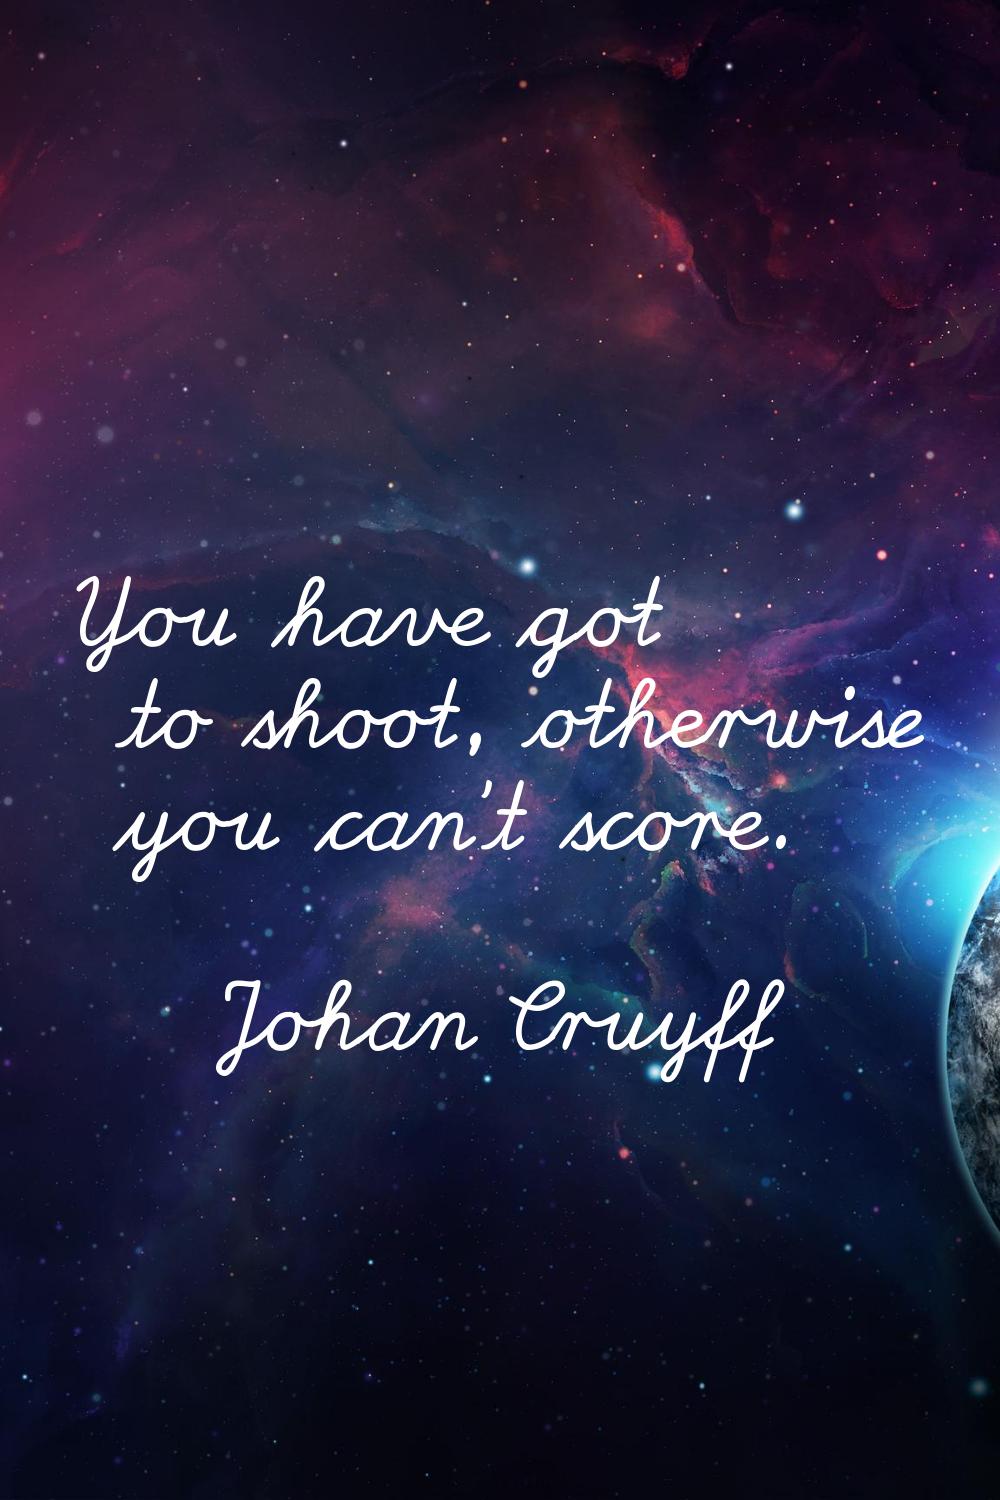 You have got to shoot, otherwise you can't score.